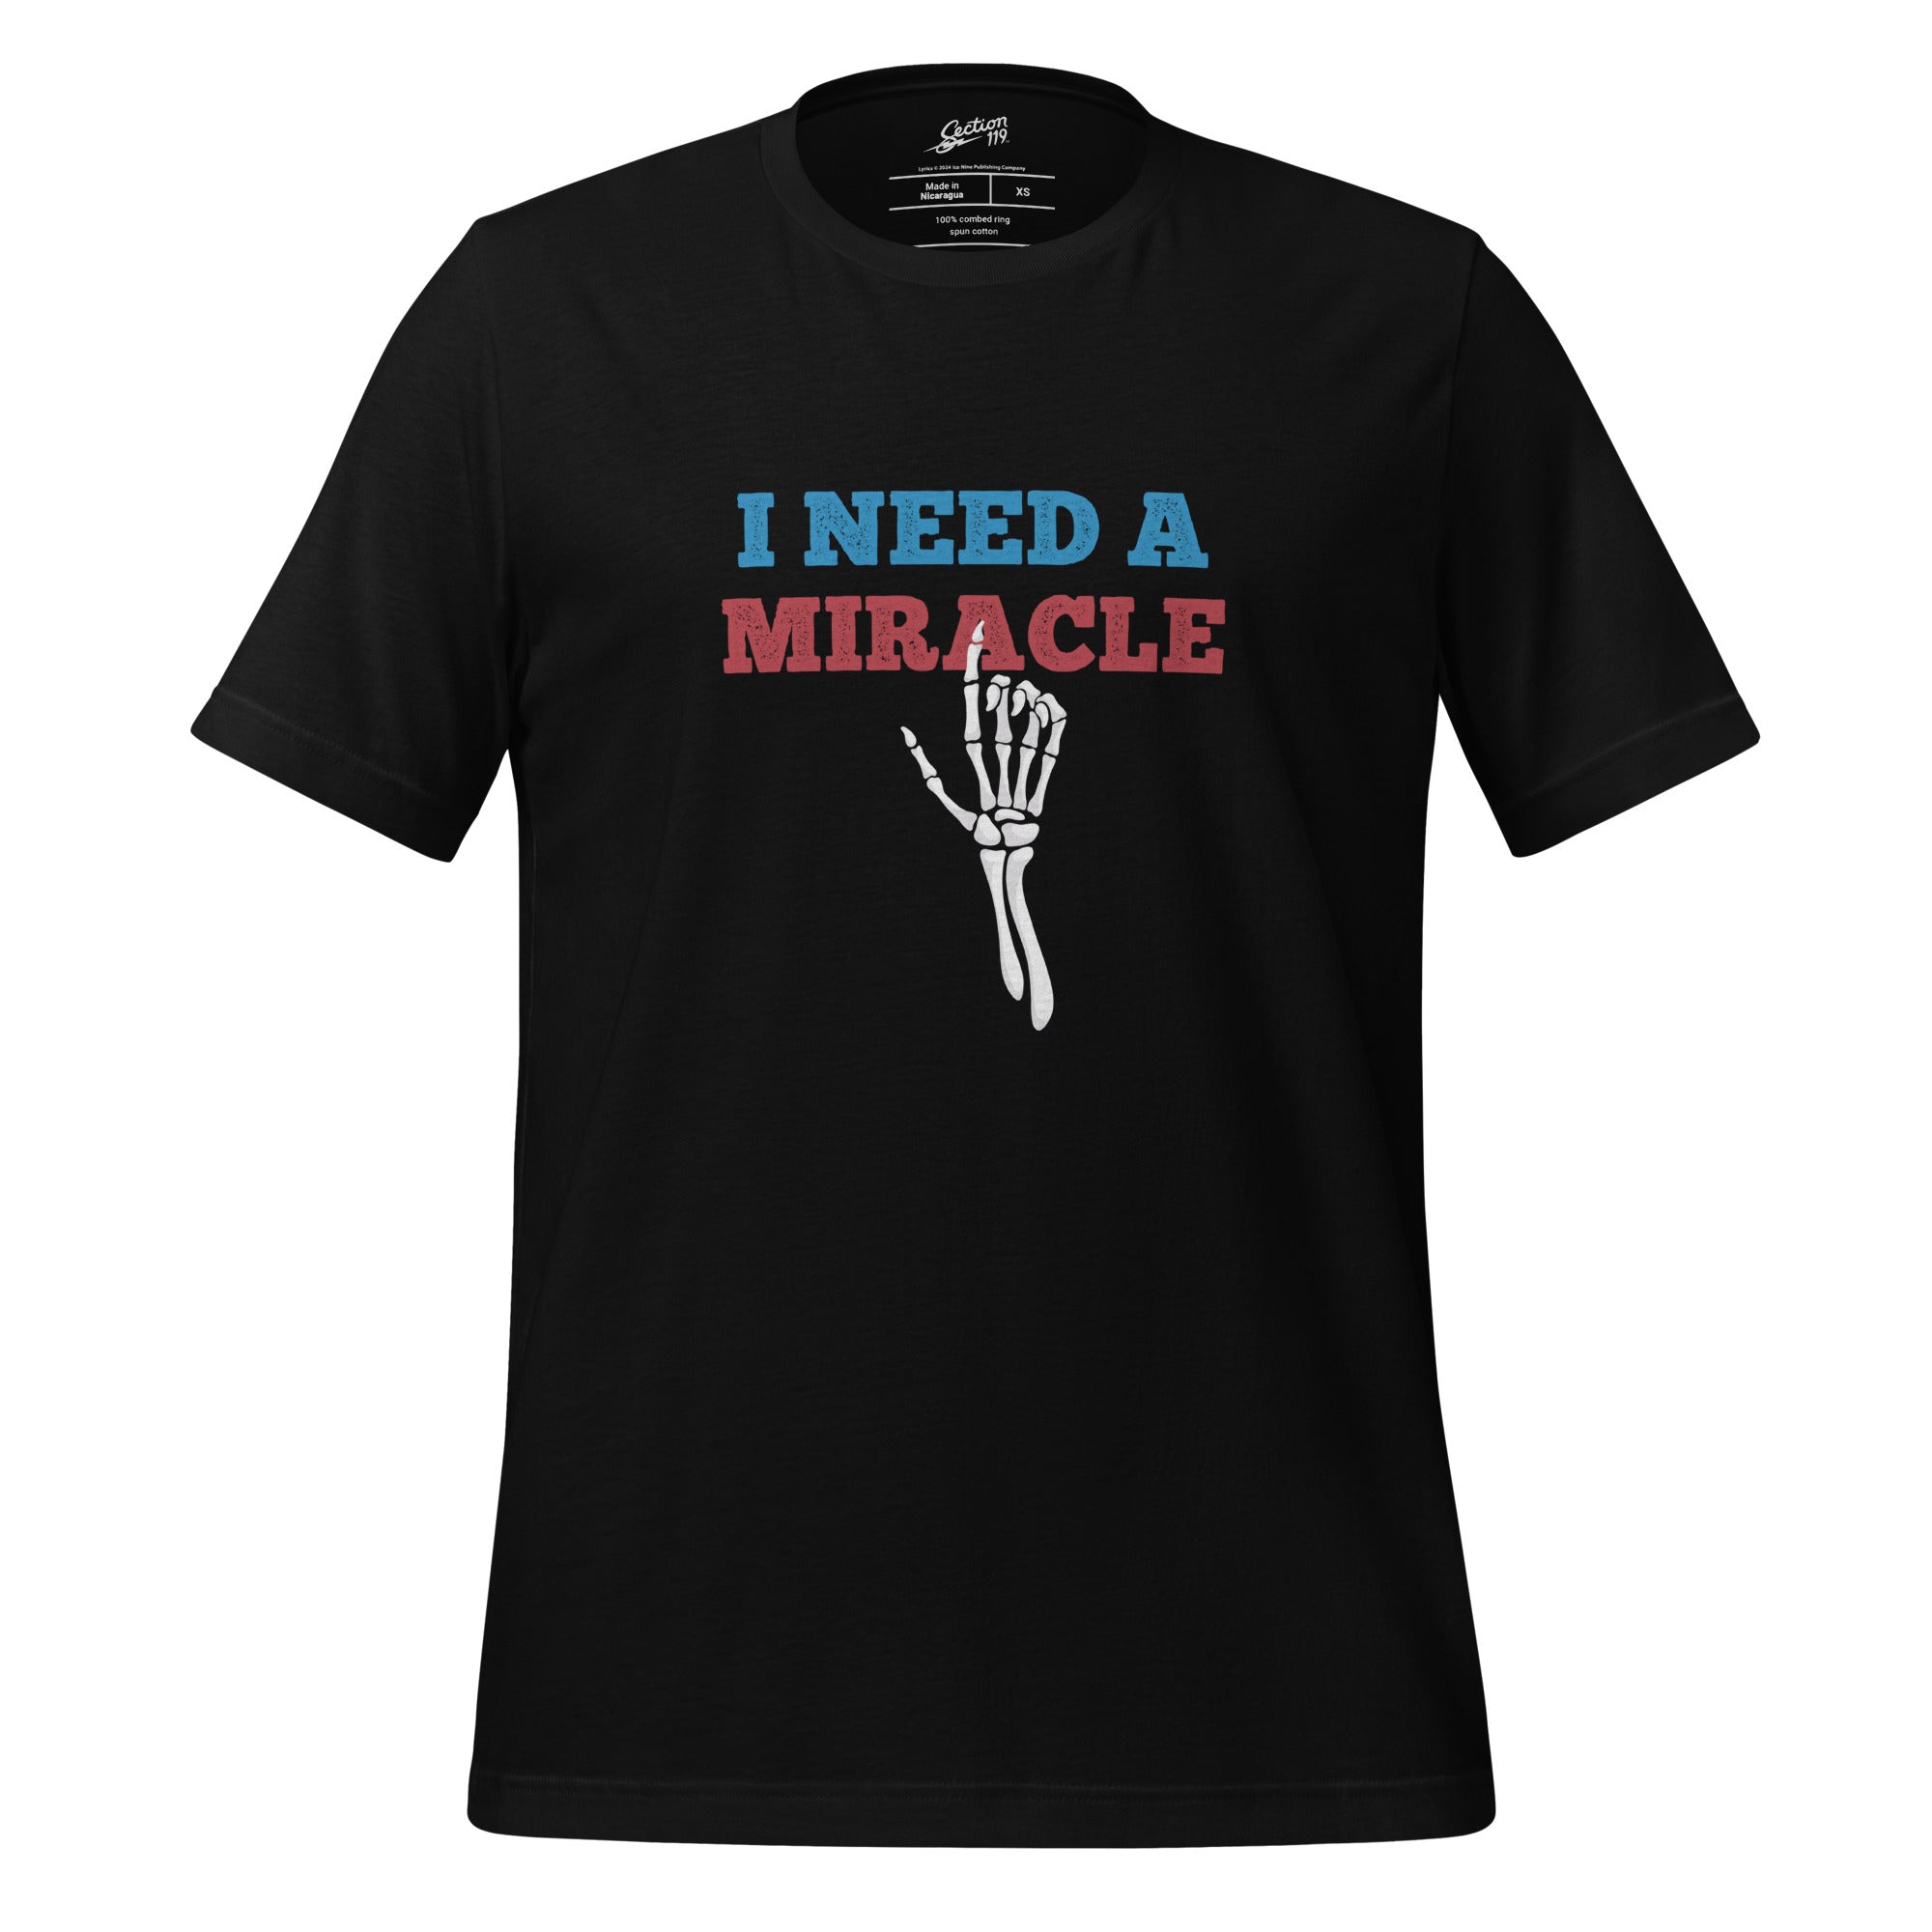 Grateful Dead Lyrics Eco T-Shirt: I Need a Miracle in Black - Section 119